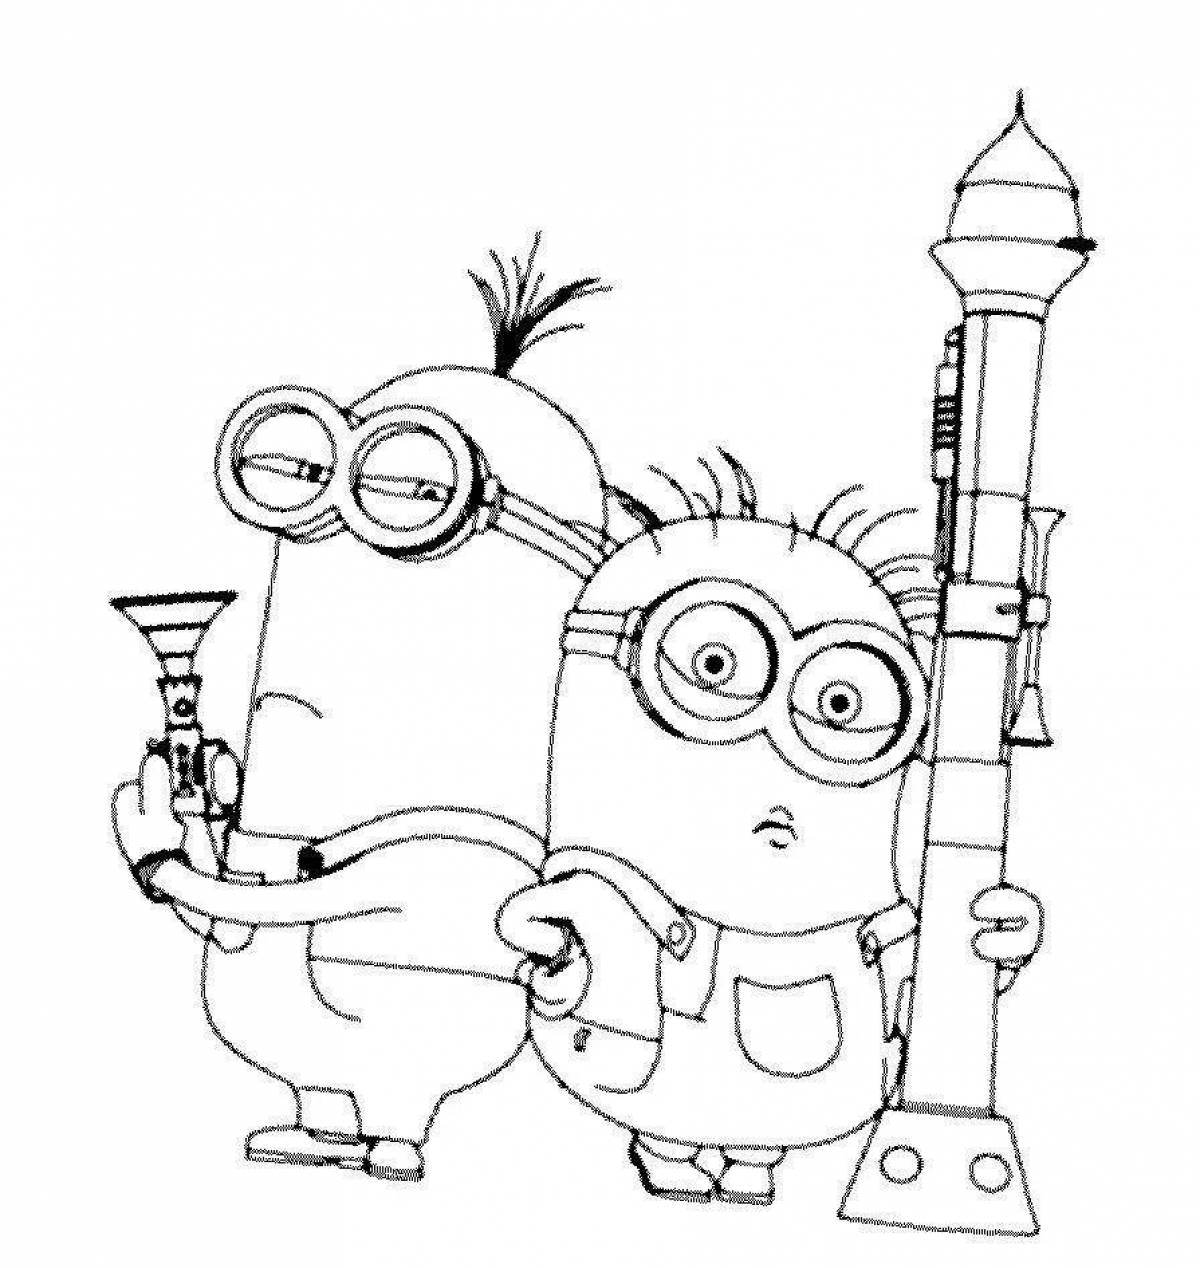 Exquisite minion coloring book for kids